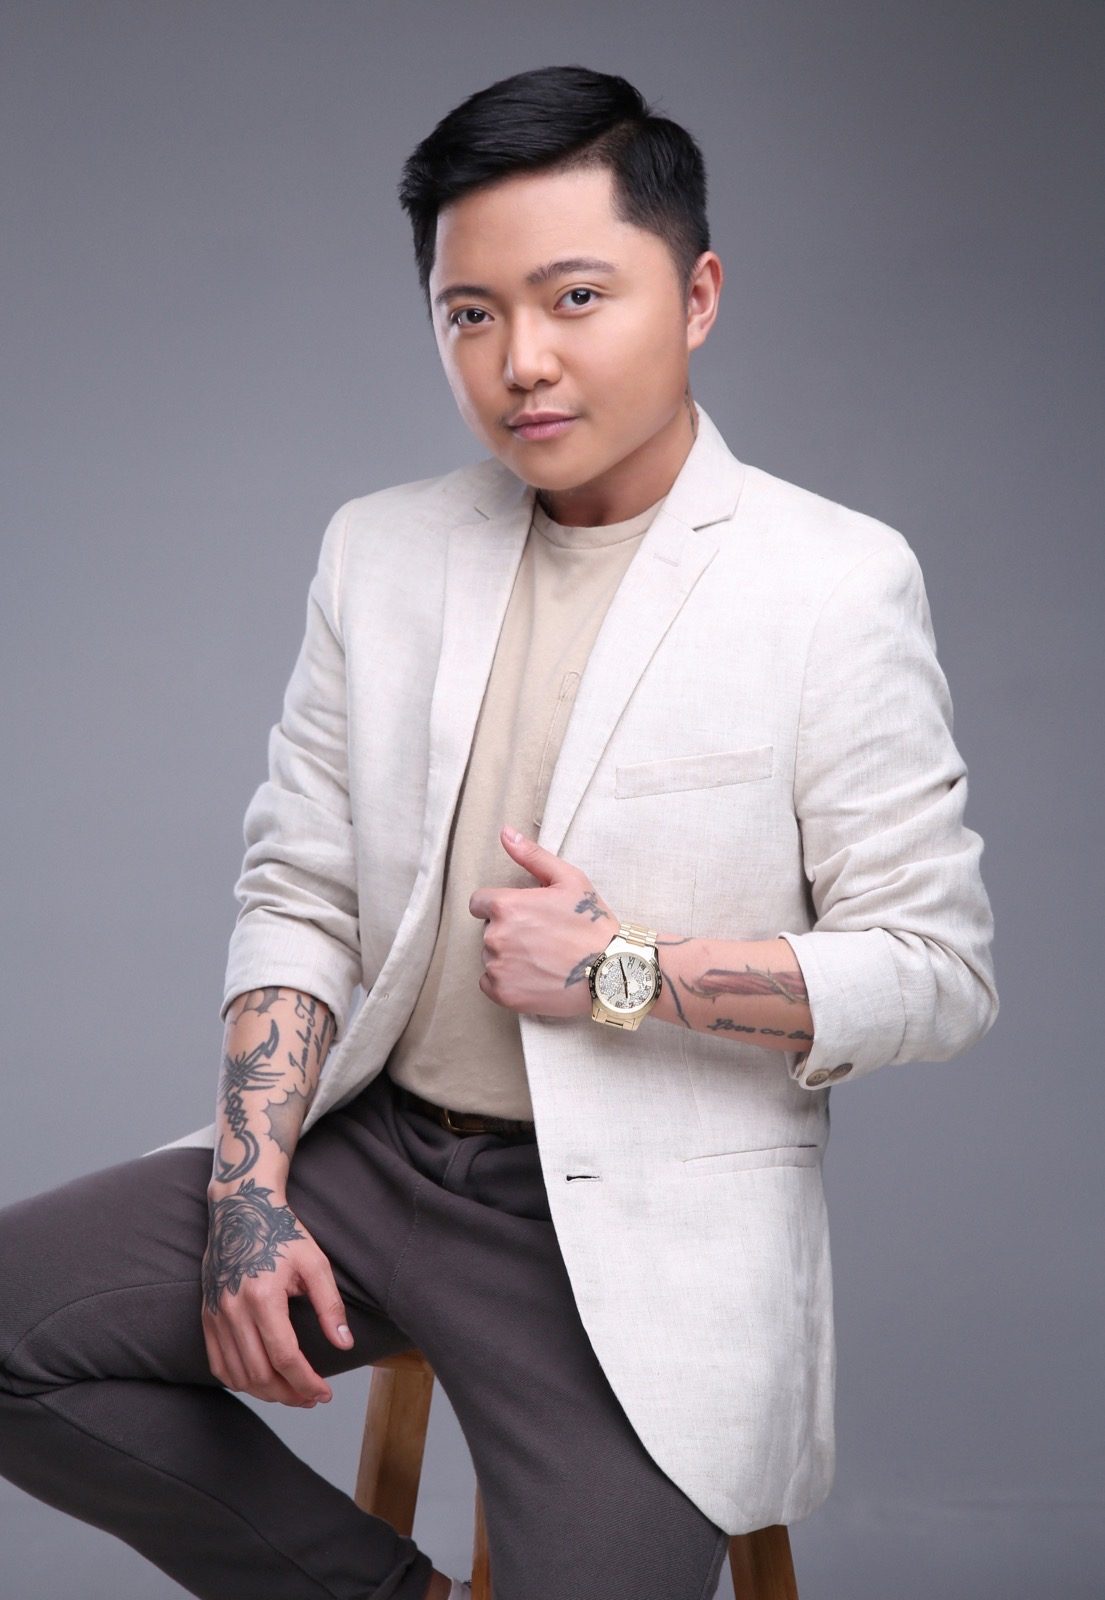 ‘Jake and Charice’ documentary earns nomination in 2020 International Emmy Awards